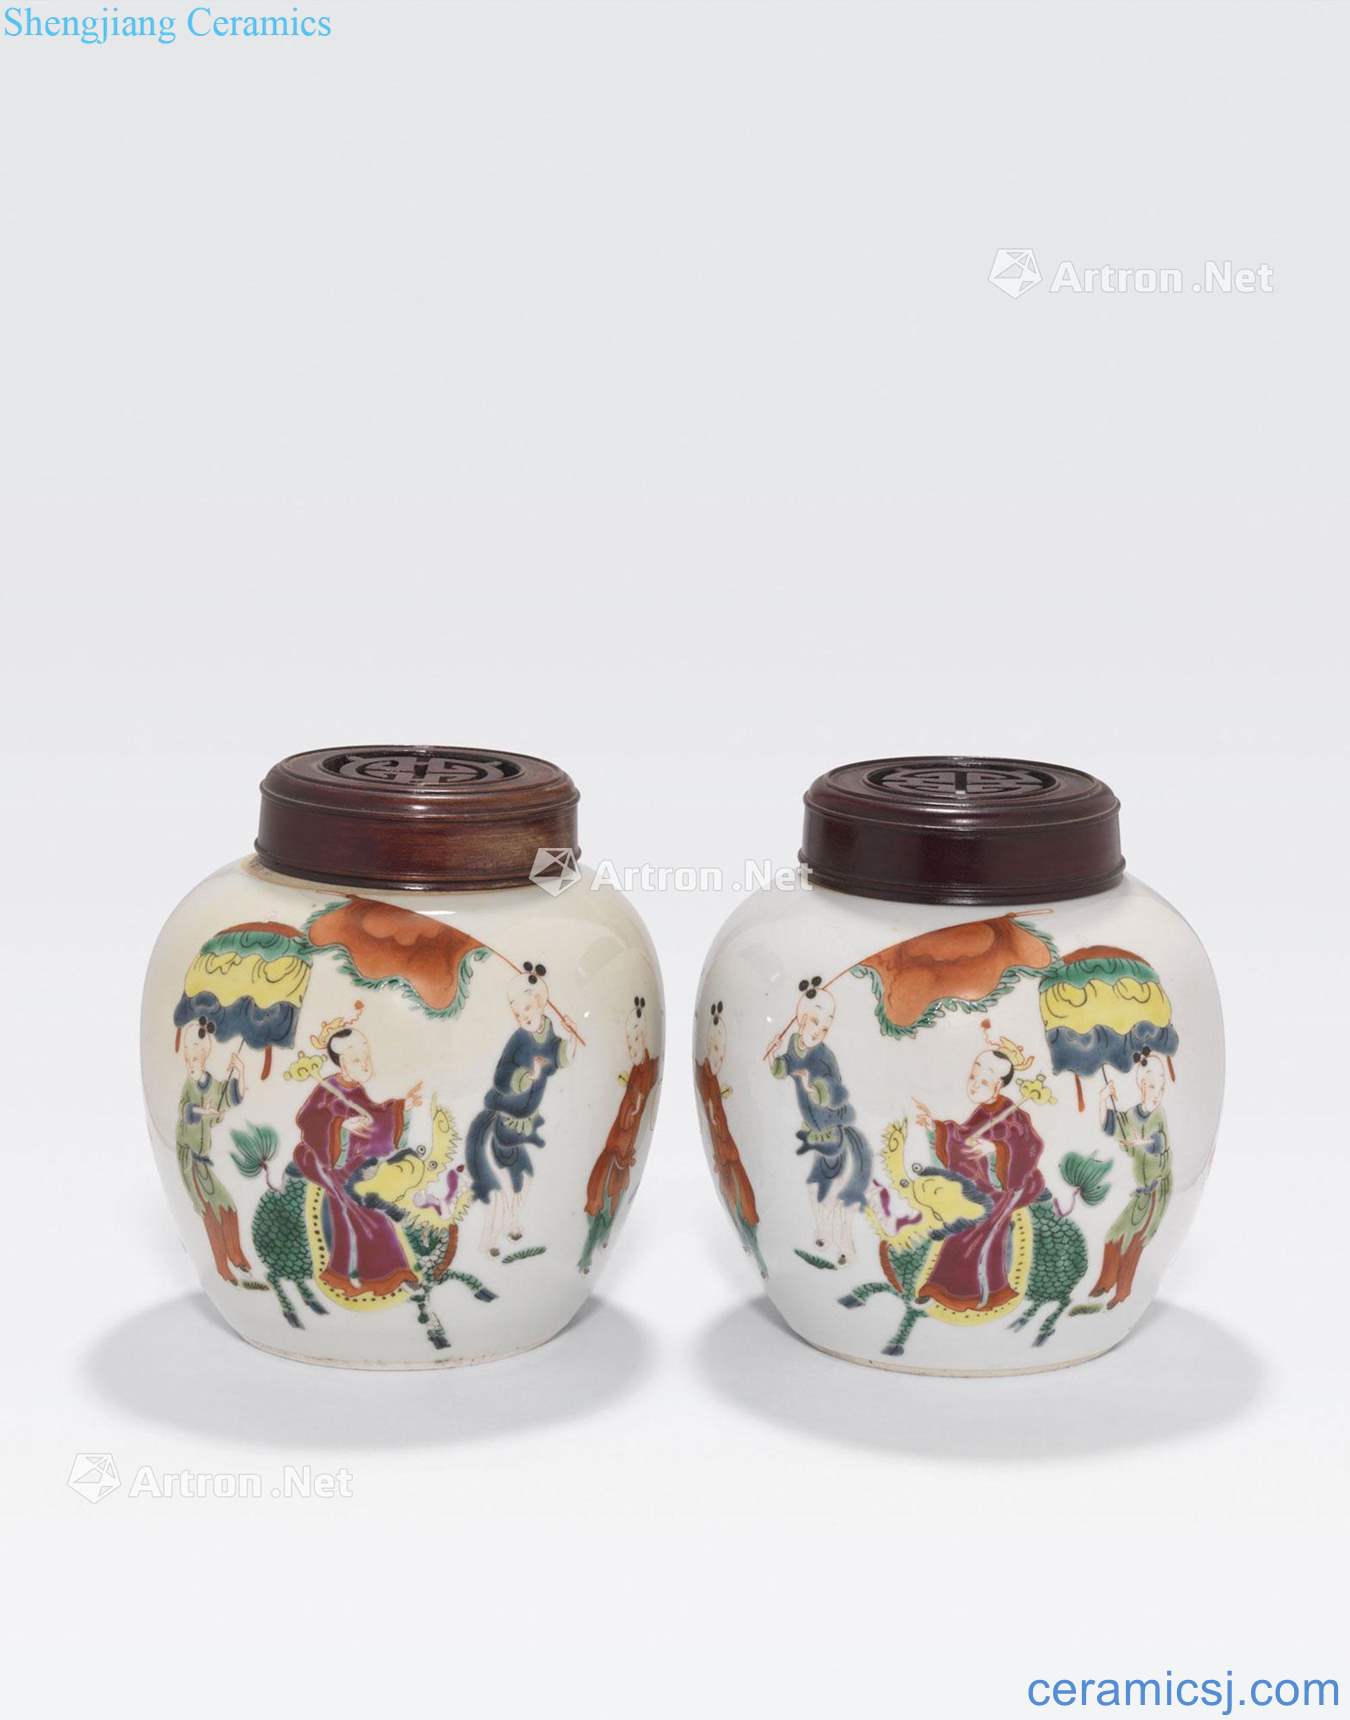 Newest the Qing/Republic period A PAIR OF SMALL FAMILLE ROSE ENAMELED PORCELAIN JARS